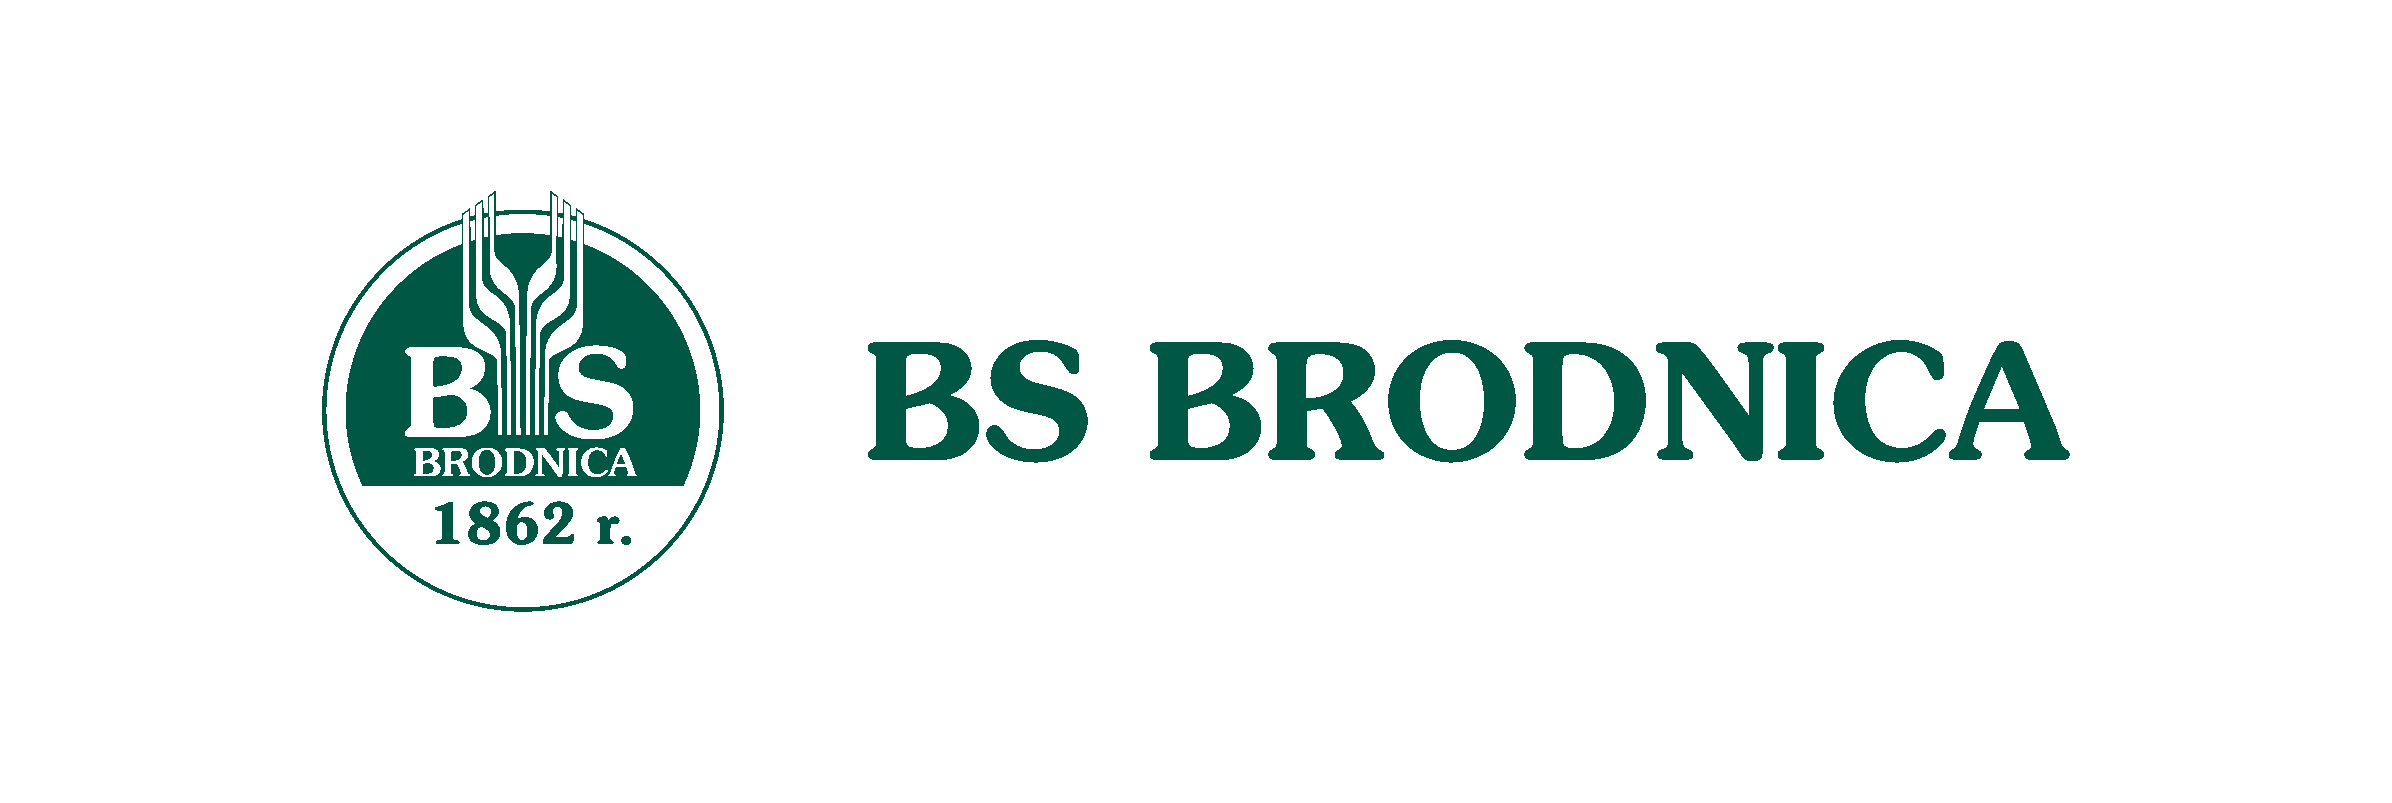 BS Brodnica 로고